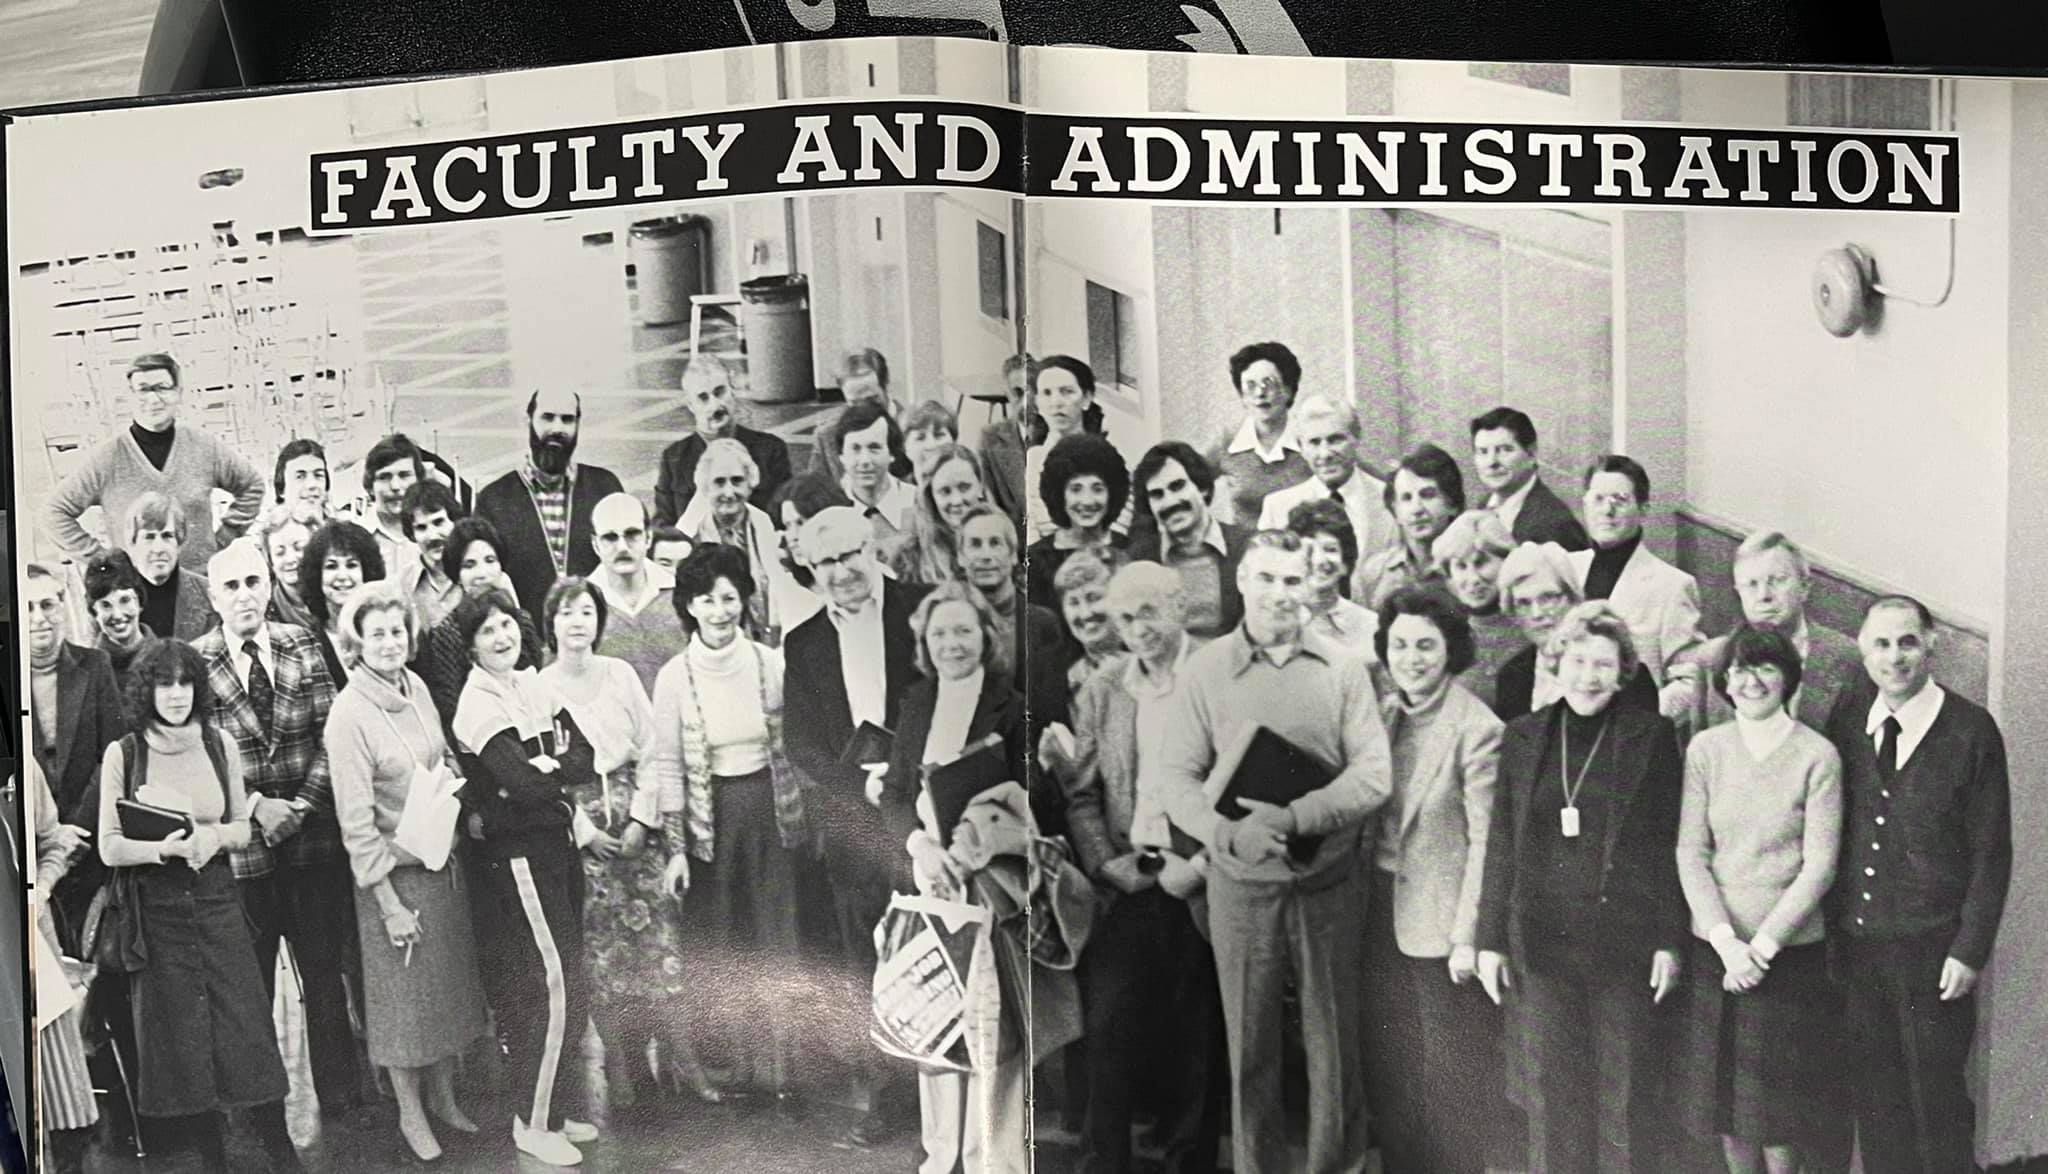 May be an image of one or more people, people standing and text that says 'FACULTY AND ADMINISTRATION ATION'